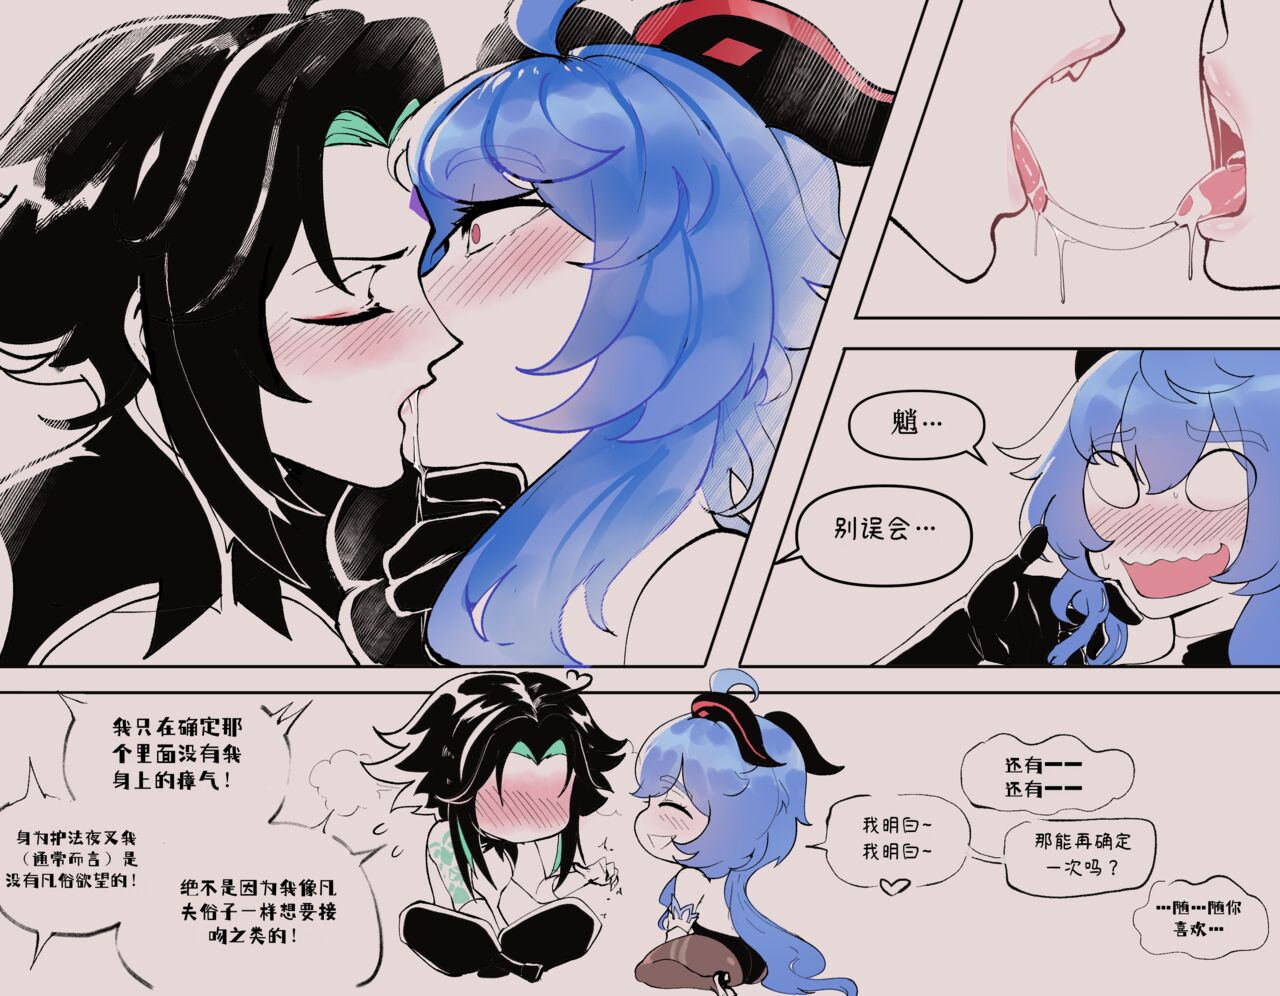 [ThiccWithaQ] Ganyu X Xiao X Childe (Chinese) 【ThiccWithaQ】甘雨X魈X公子